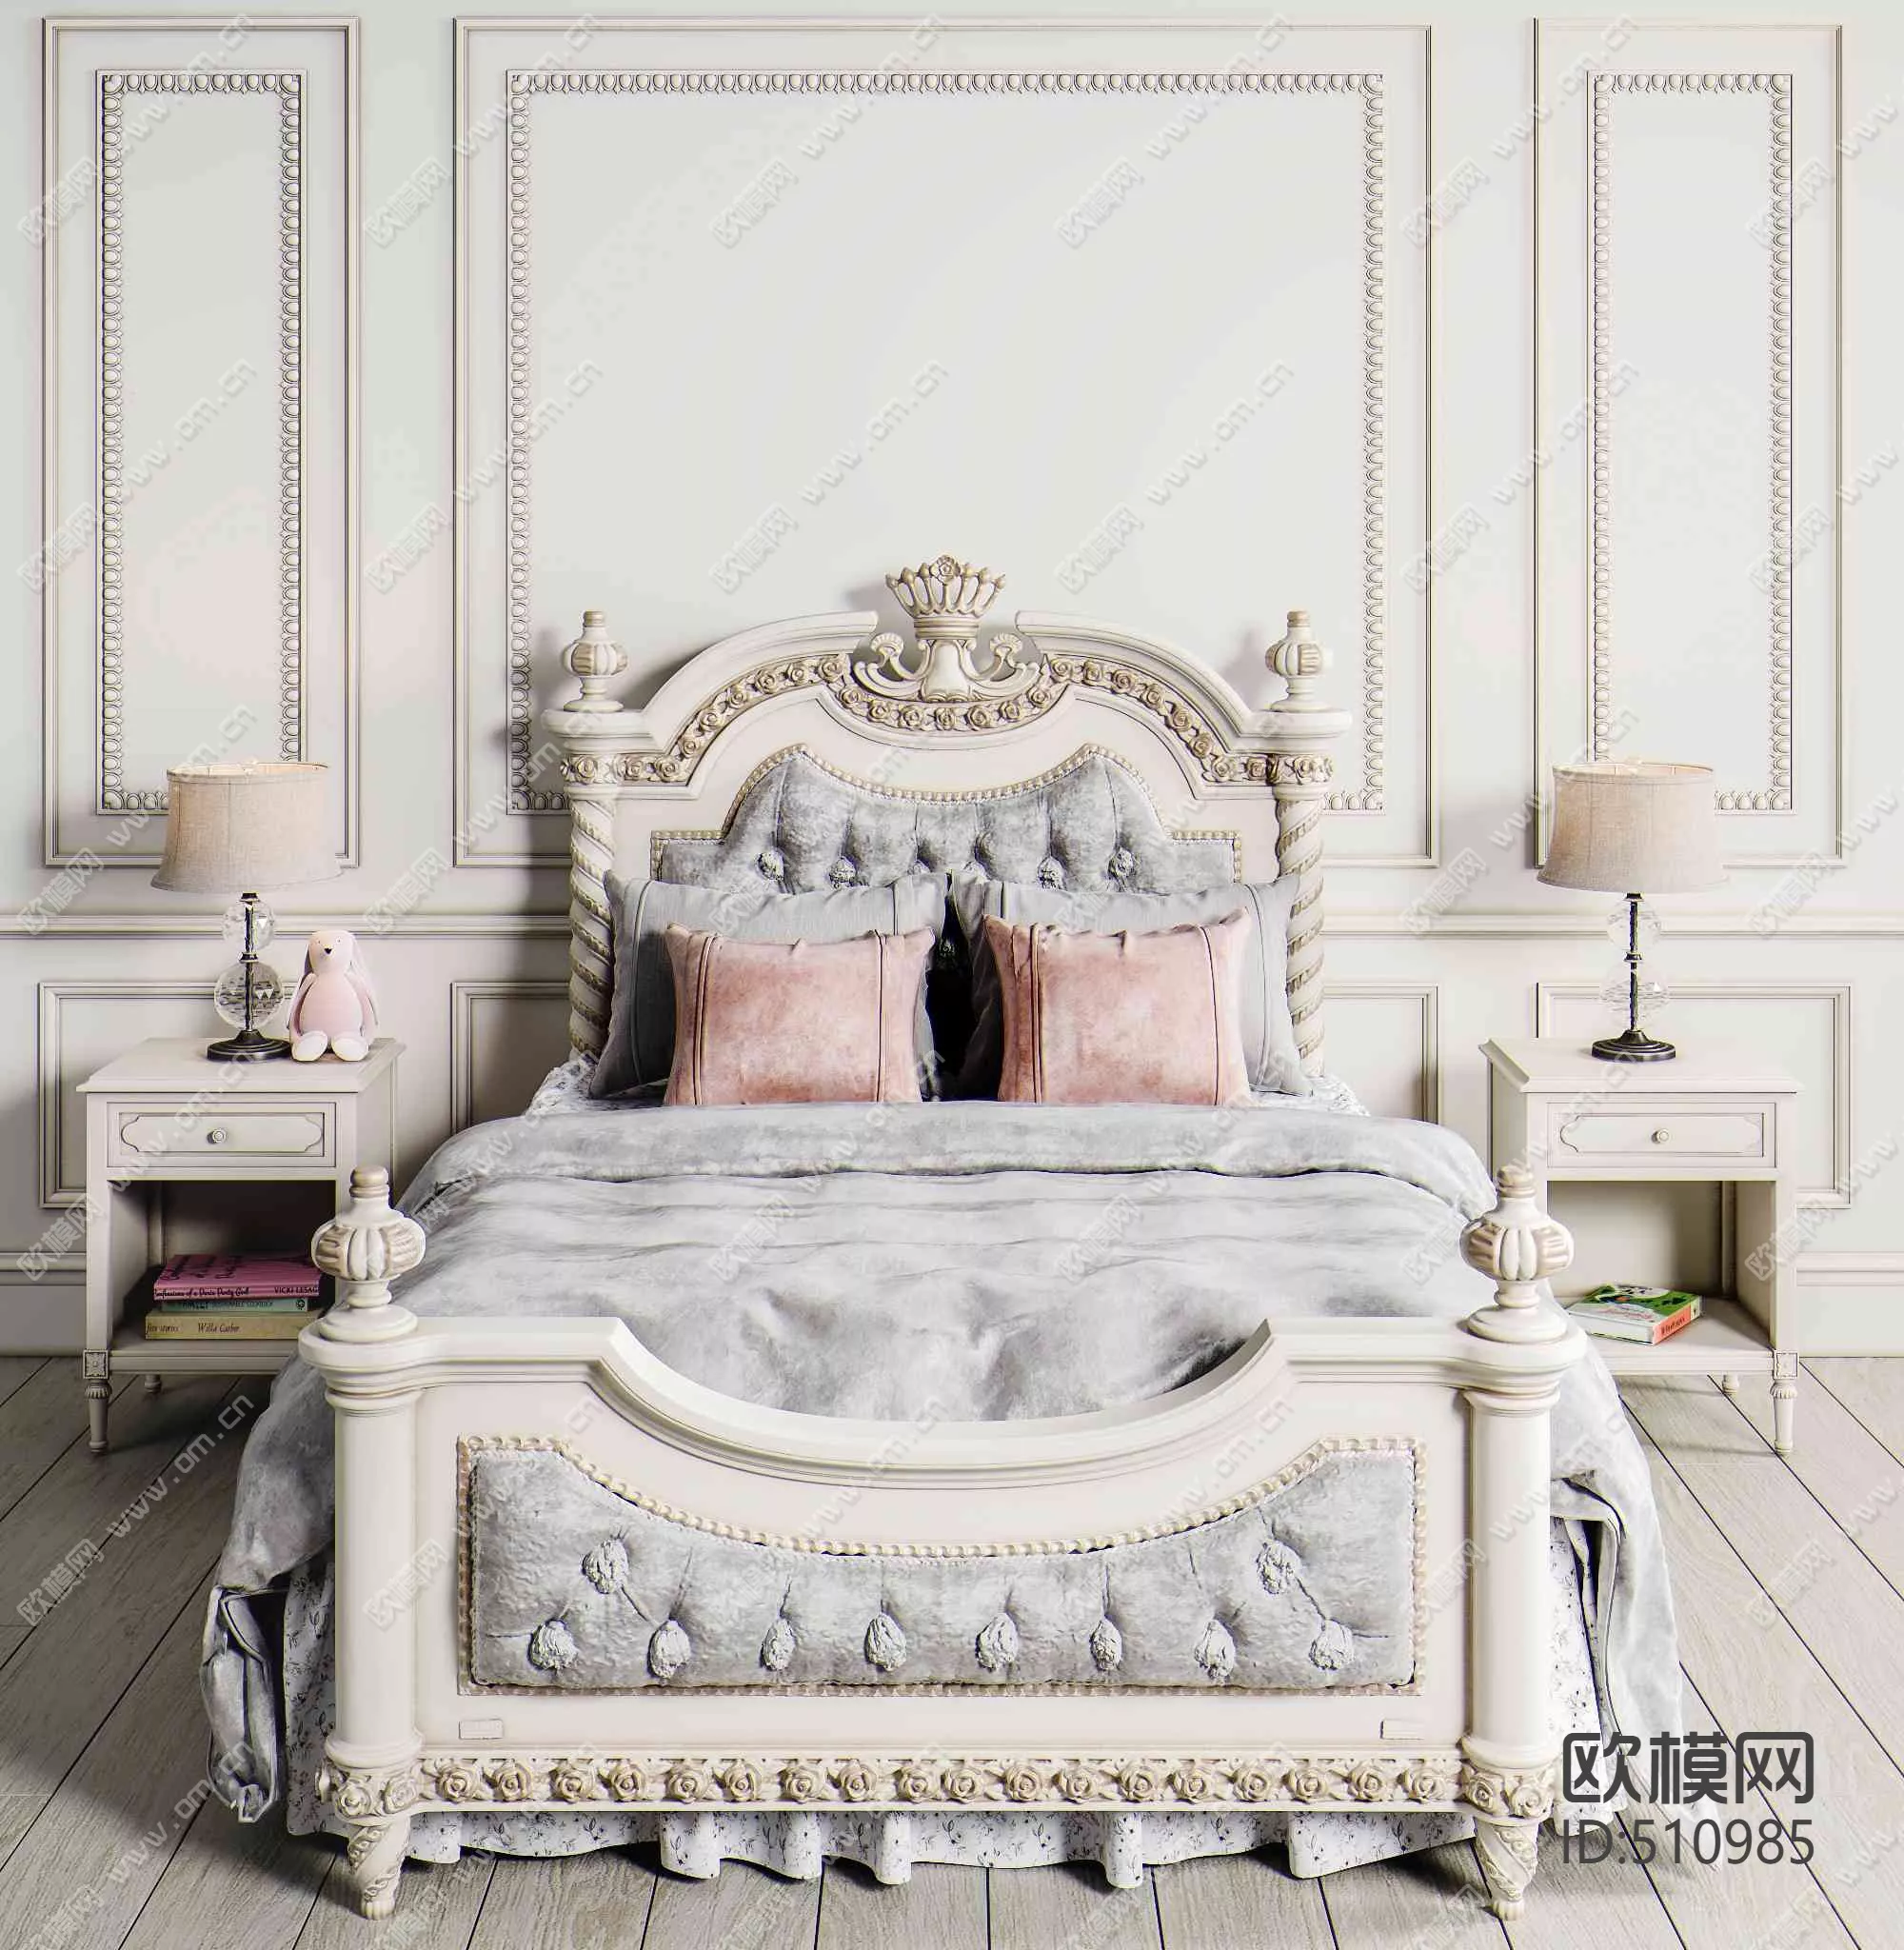 NEO CLASSIC BED - SKETCHUP 3D MODEL - VRAY OR ENSCAPE - ID16995